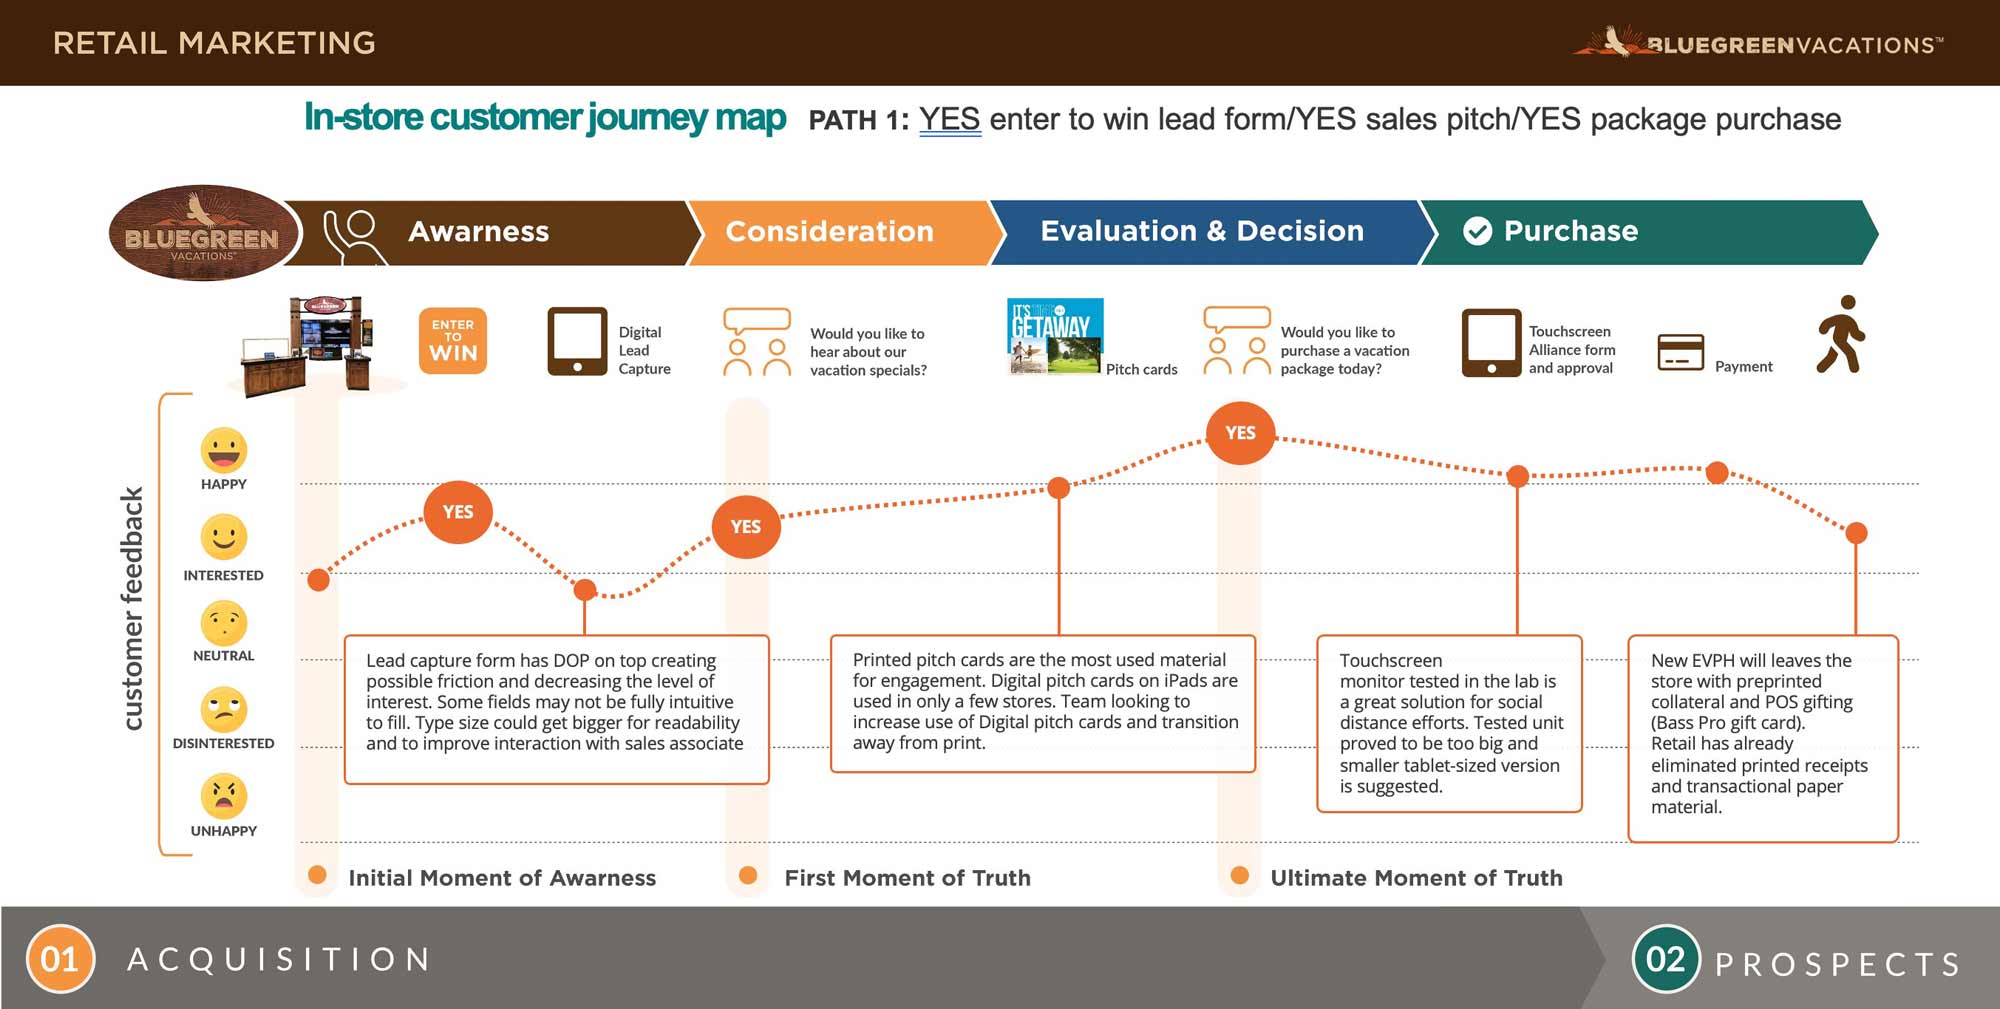 User flow in-store customer experience